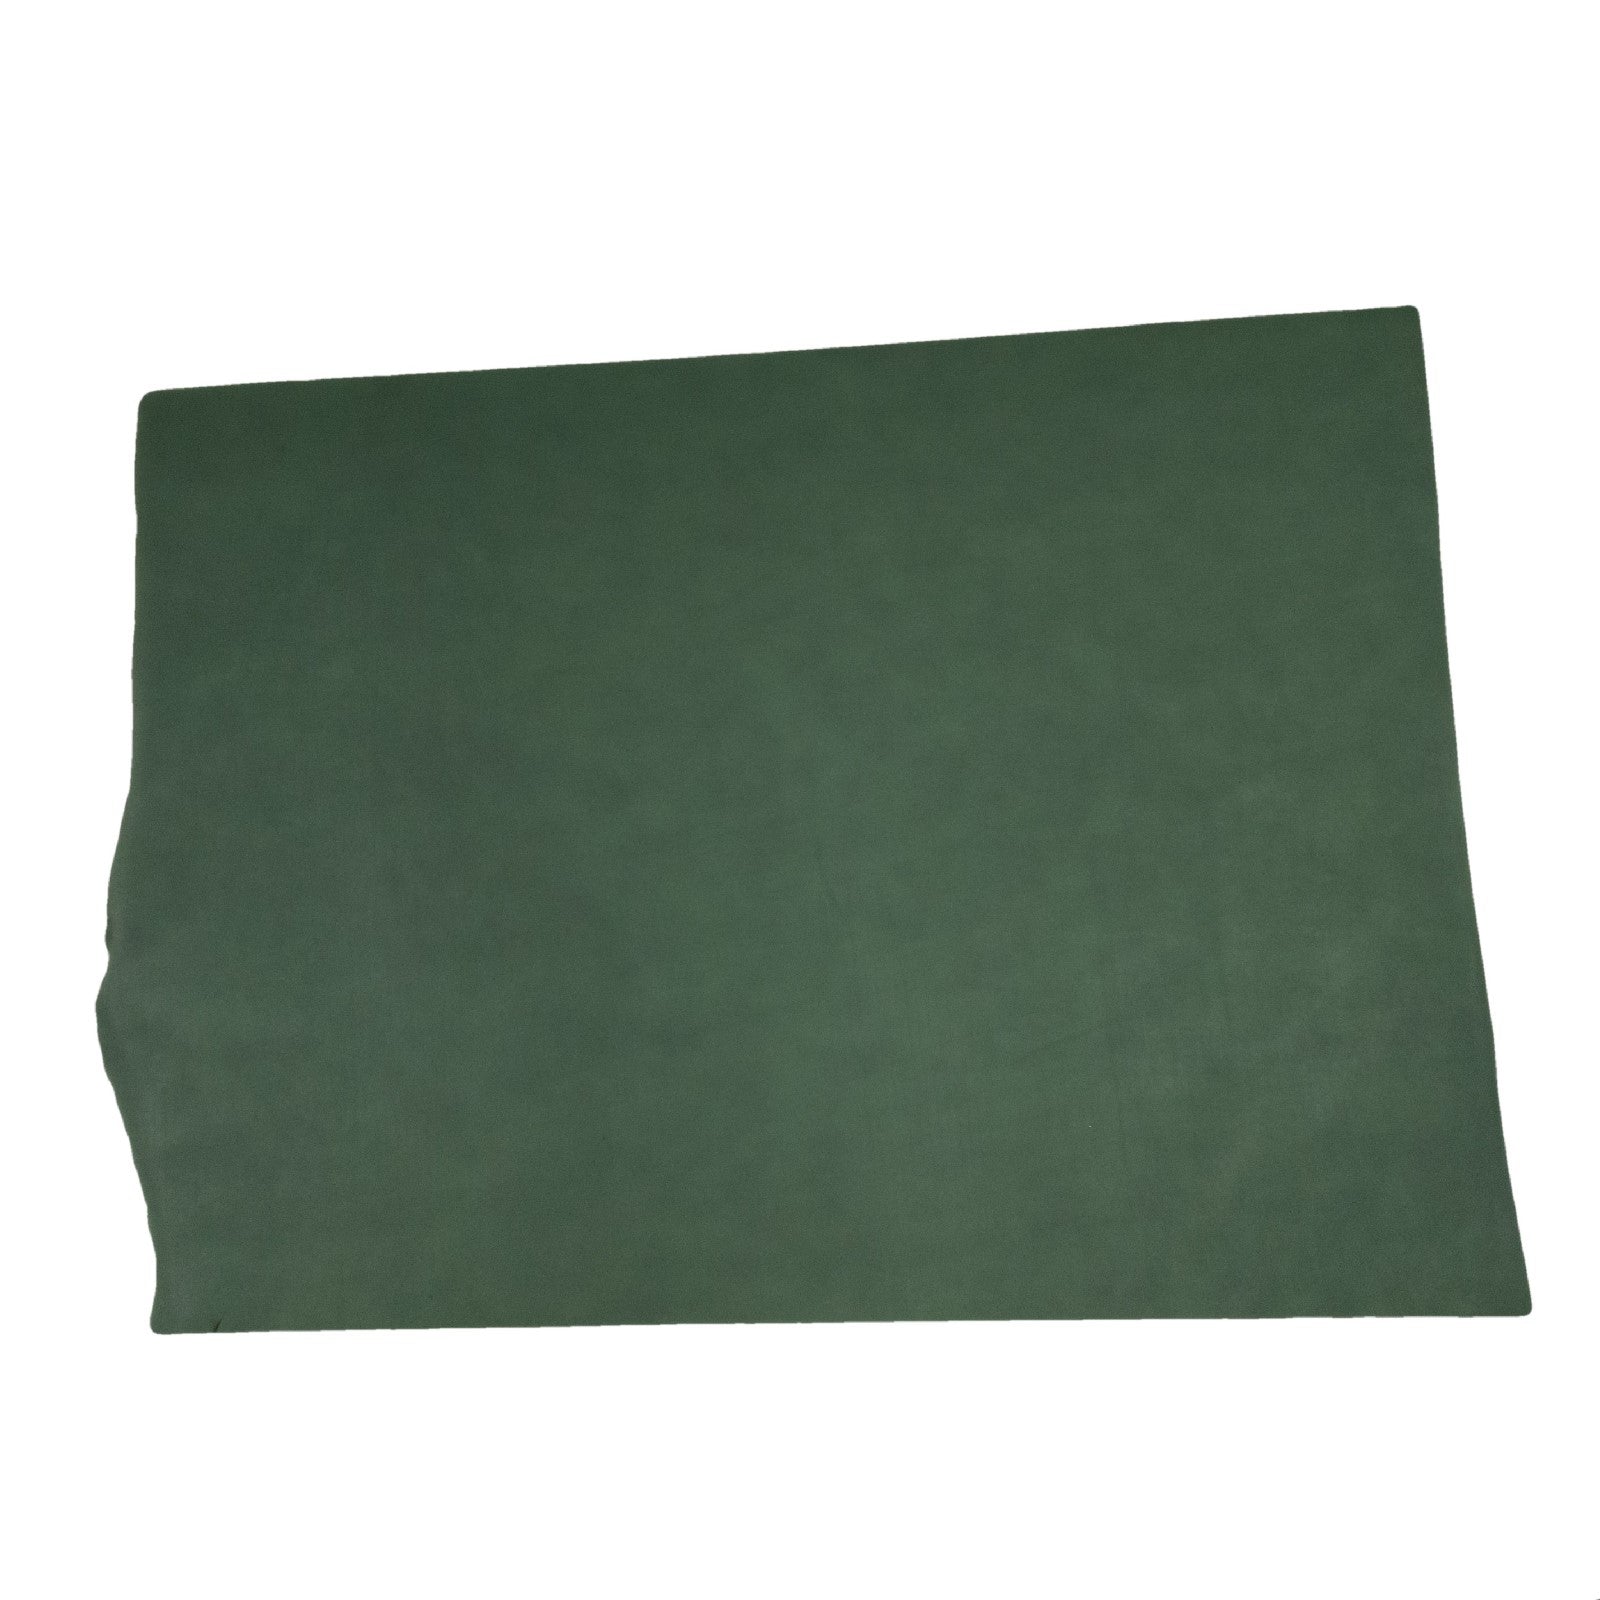 Green Alpine Meadow, Oil Tanned Summits Edge Sides & Pieces, 6.5-7.5 Square Foot / Project Piece (Middle) | The Leather Guy